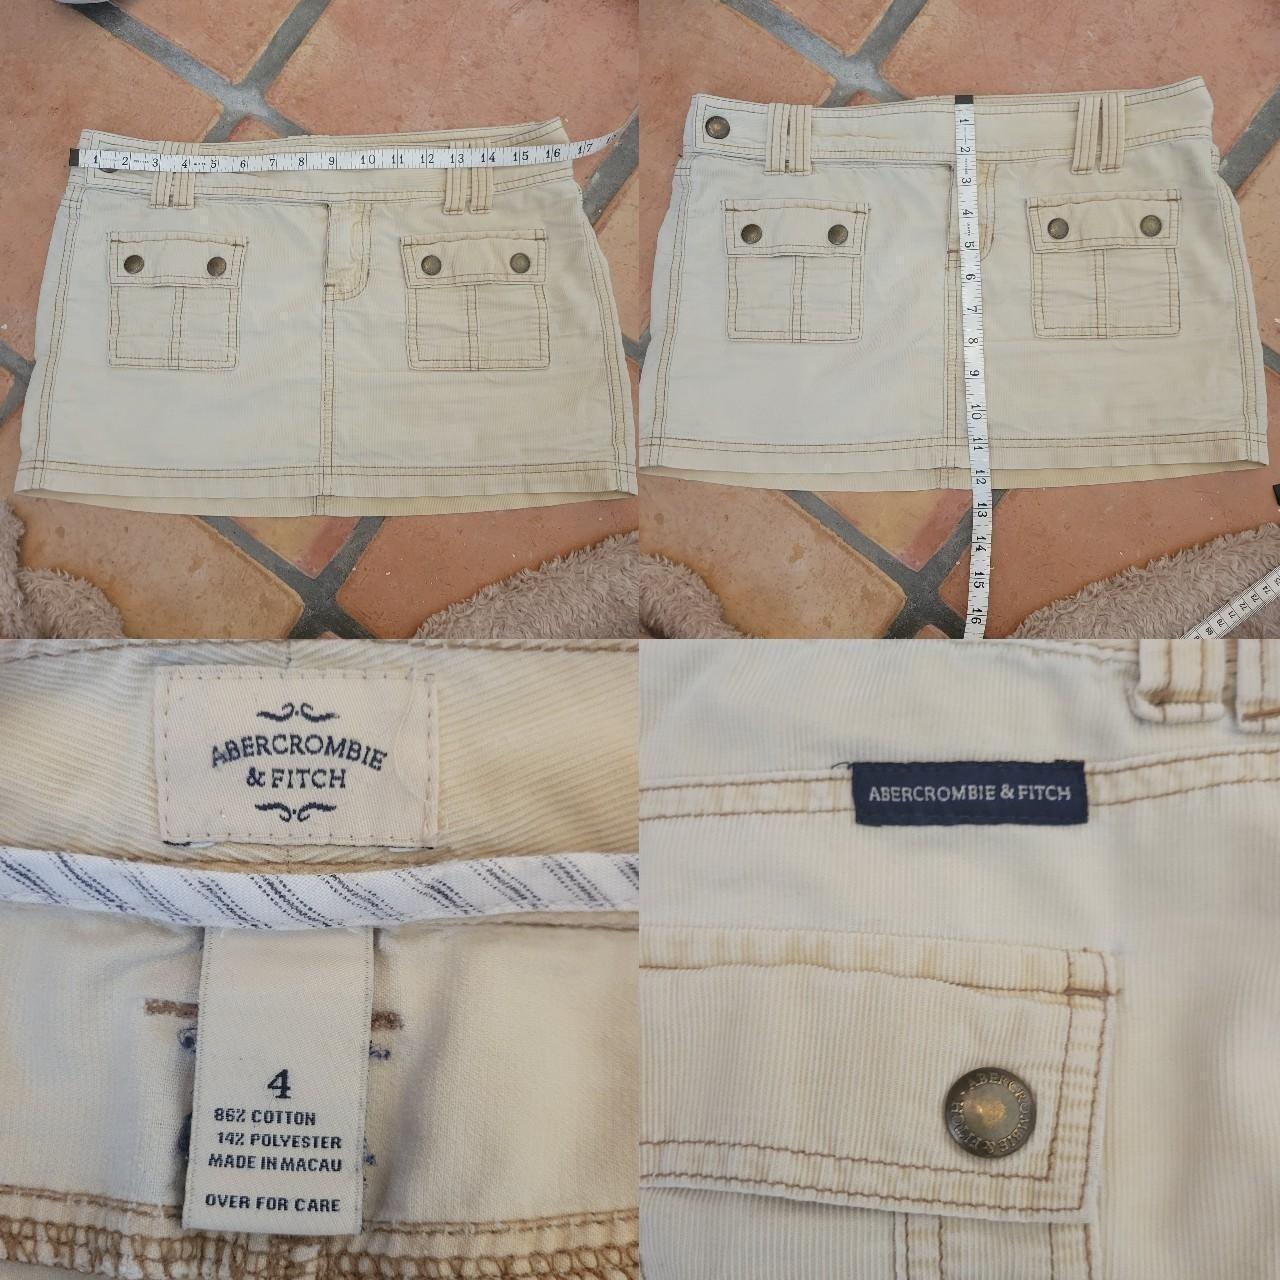 Abercrombie & Fitch Women's Cream and Tan Skirt (4)